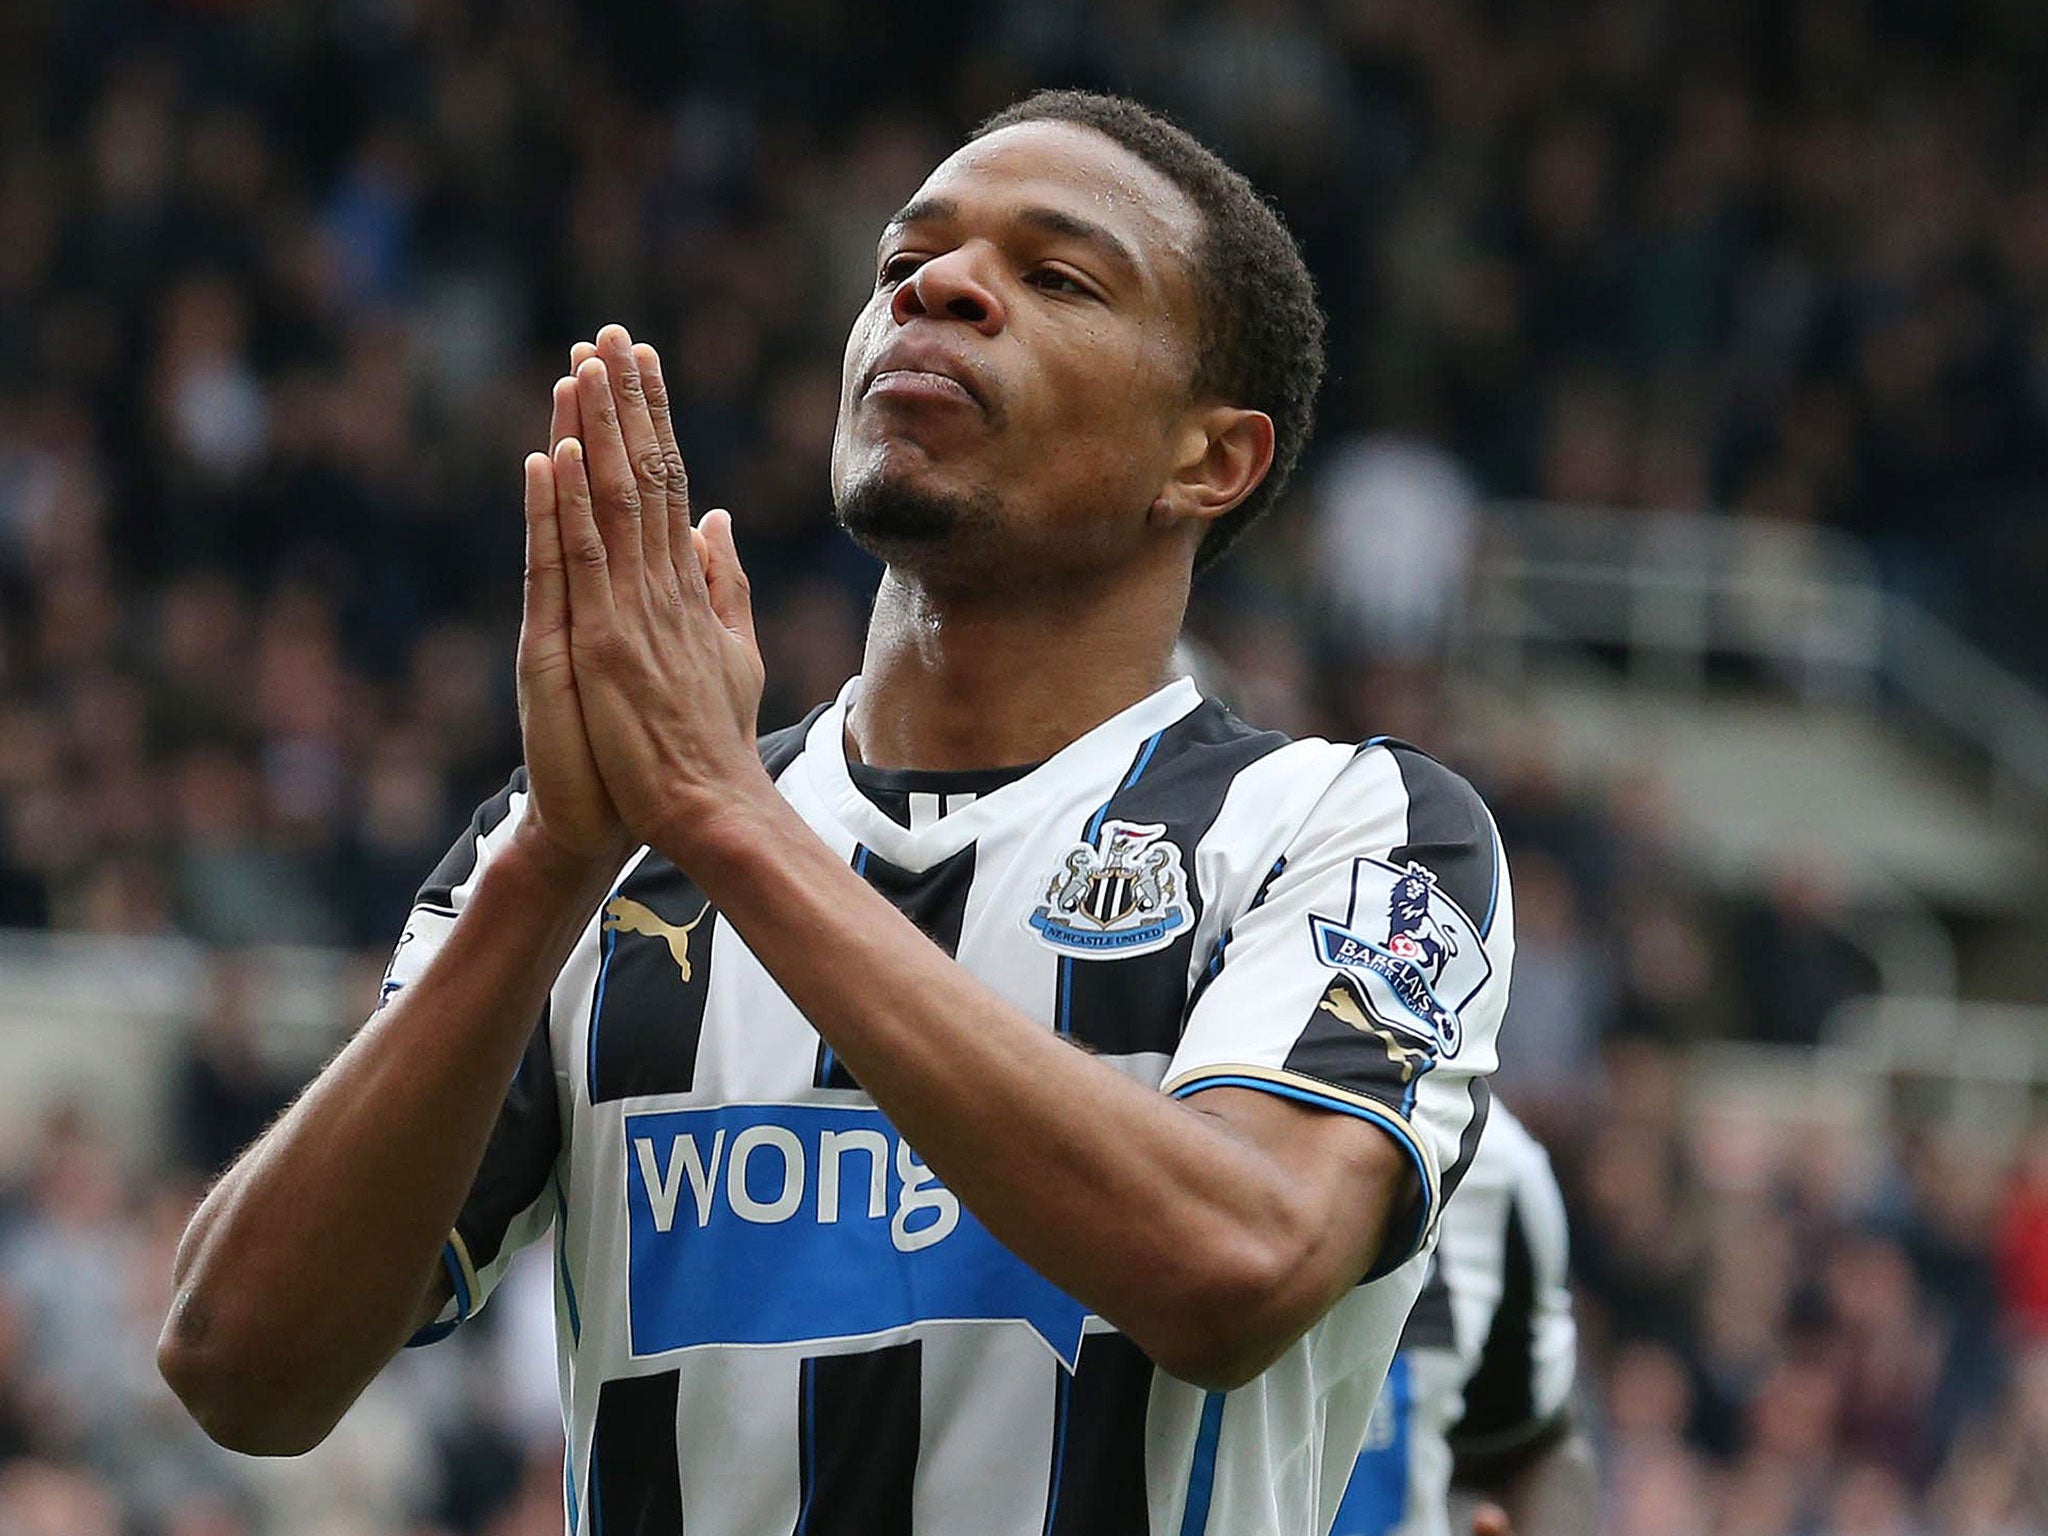 Loic Remy in action for Newcastle